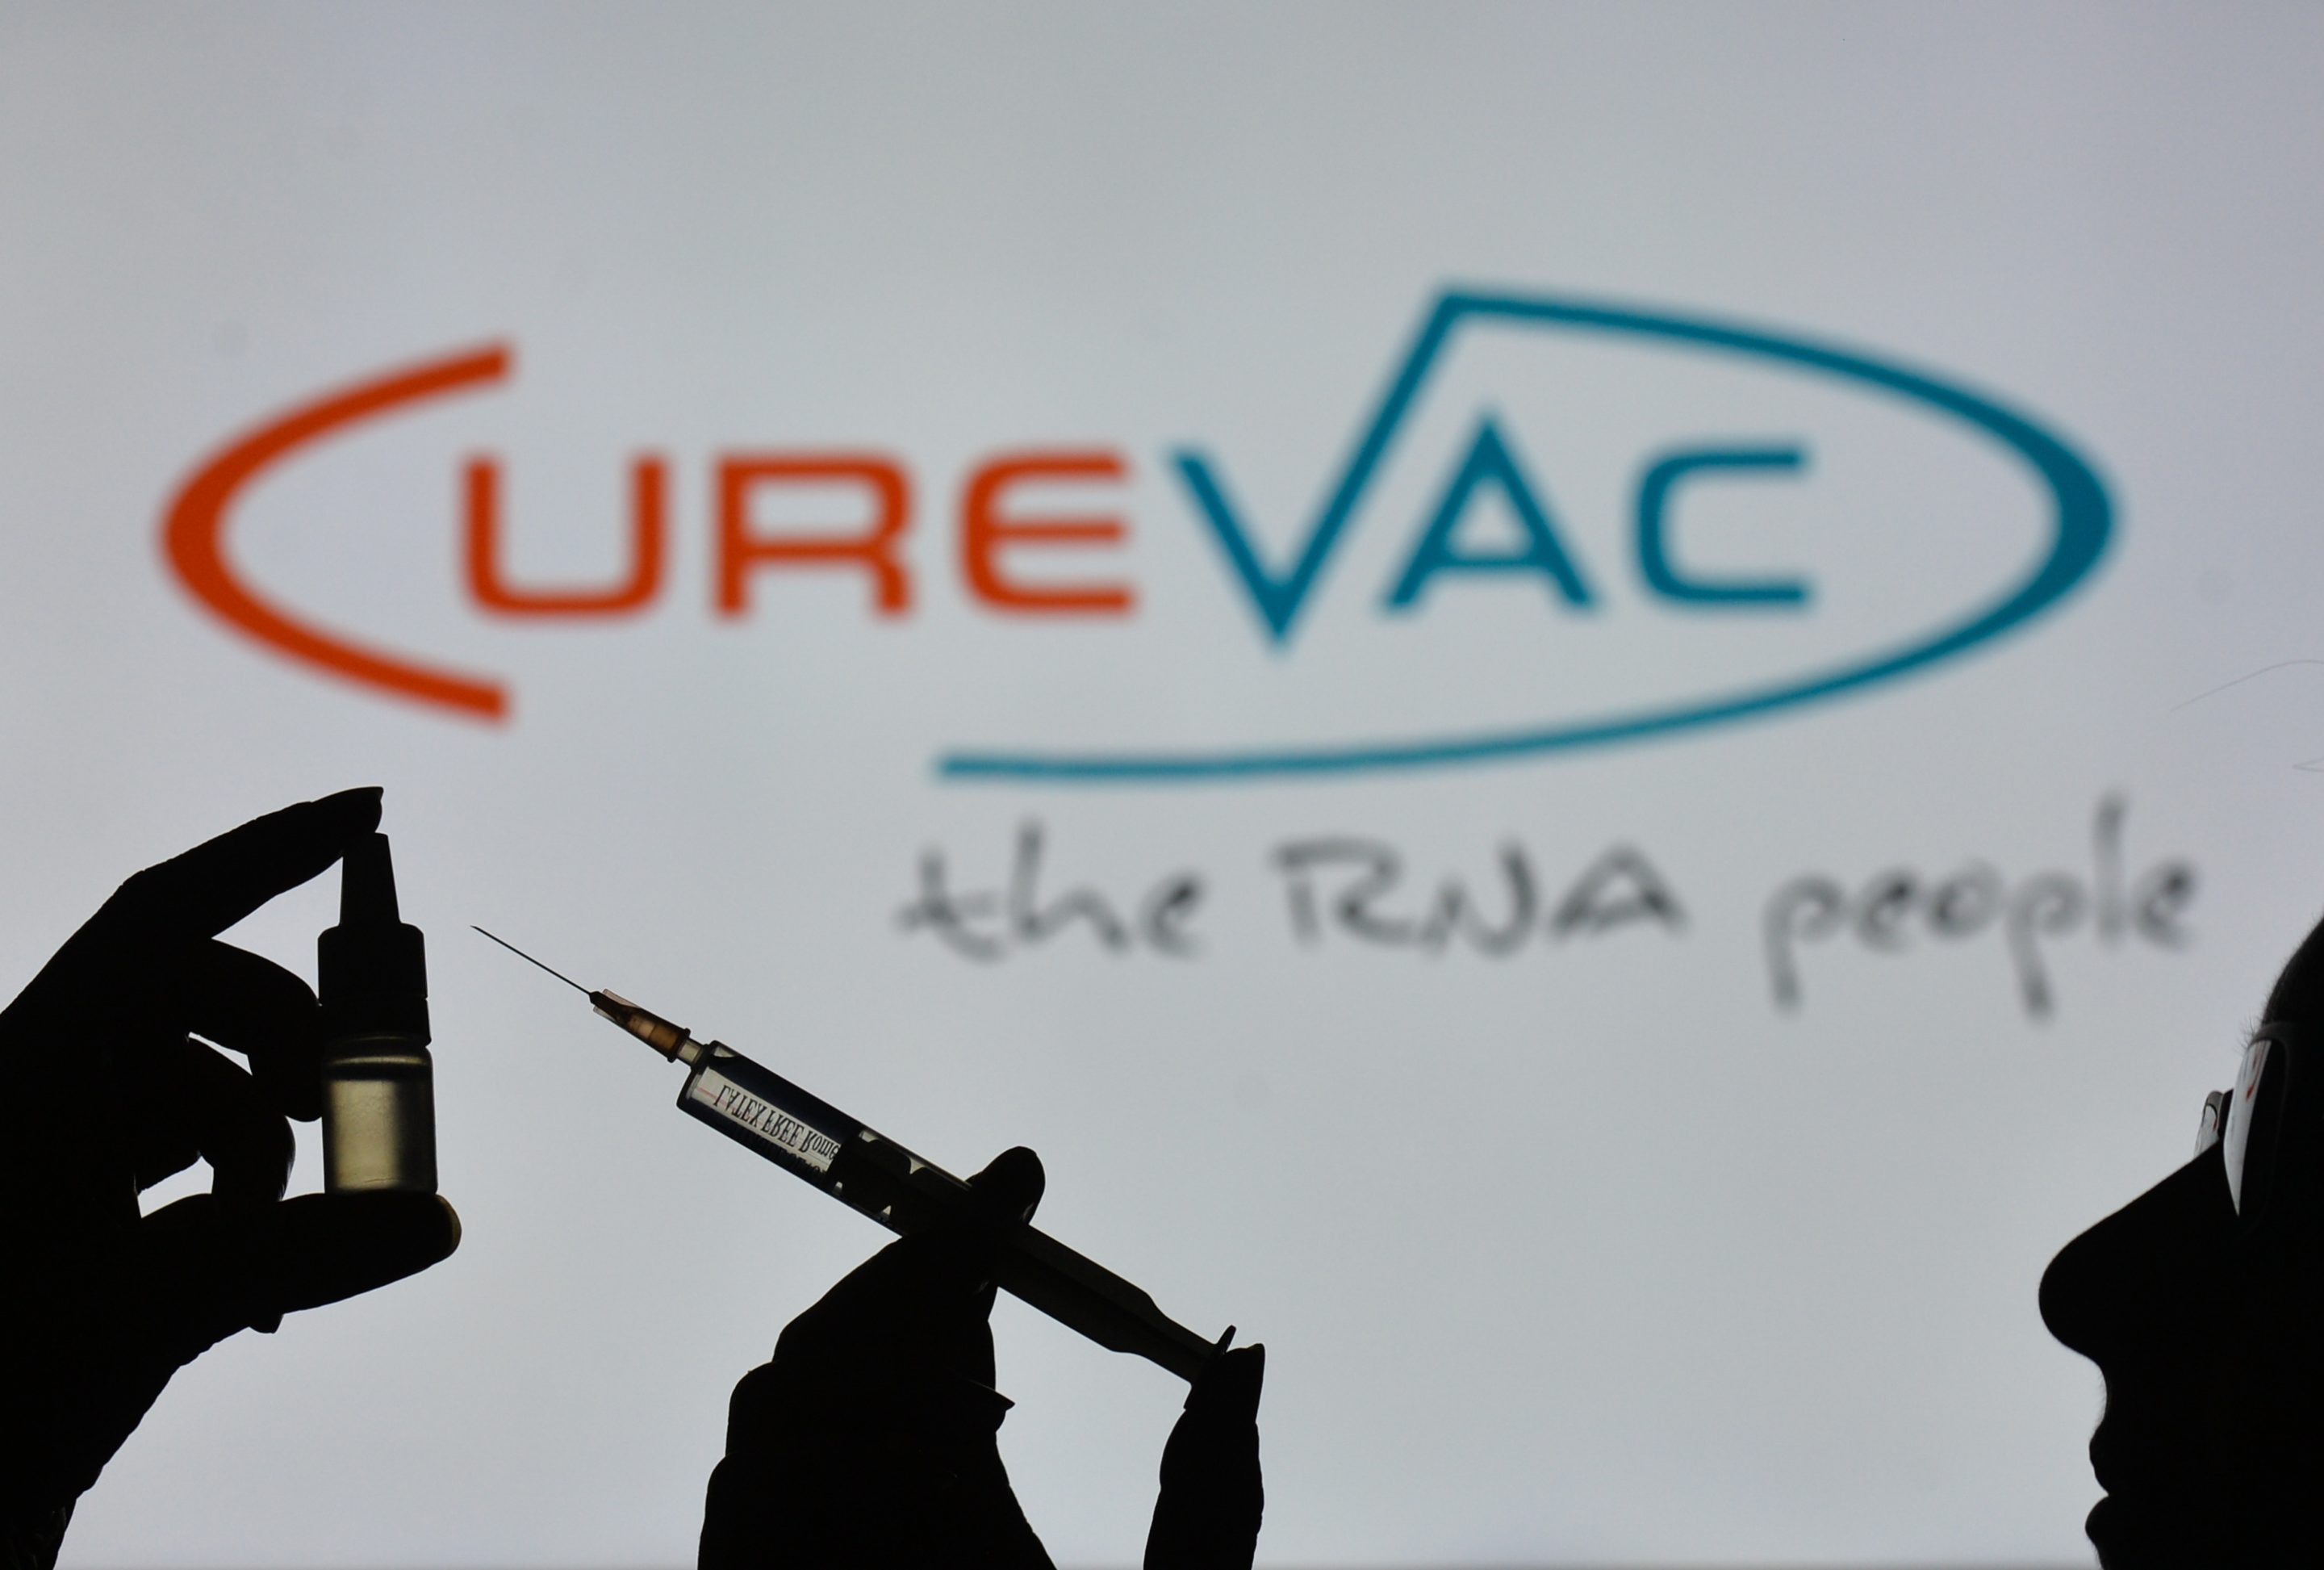 Failed vaccine have more than halved the stock market value of Curevac